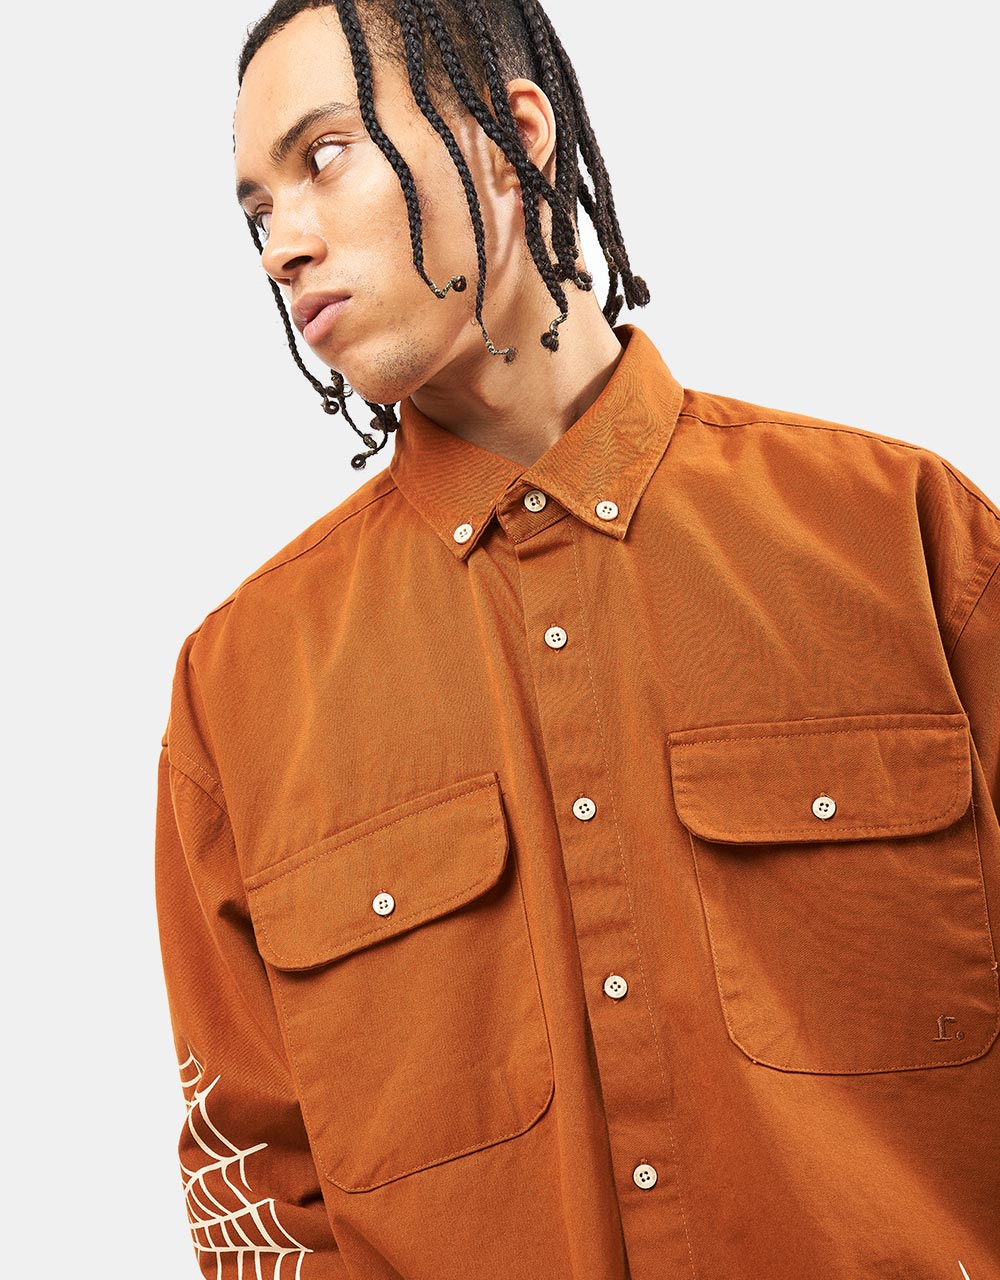 Route One Guarino Long Sleeve Shirt - Spiderweb/Brown